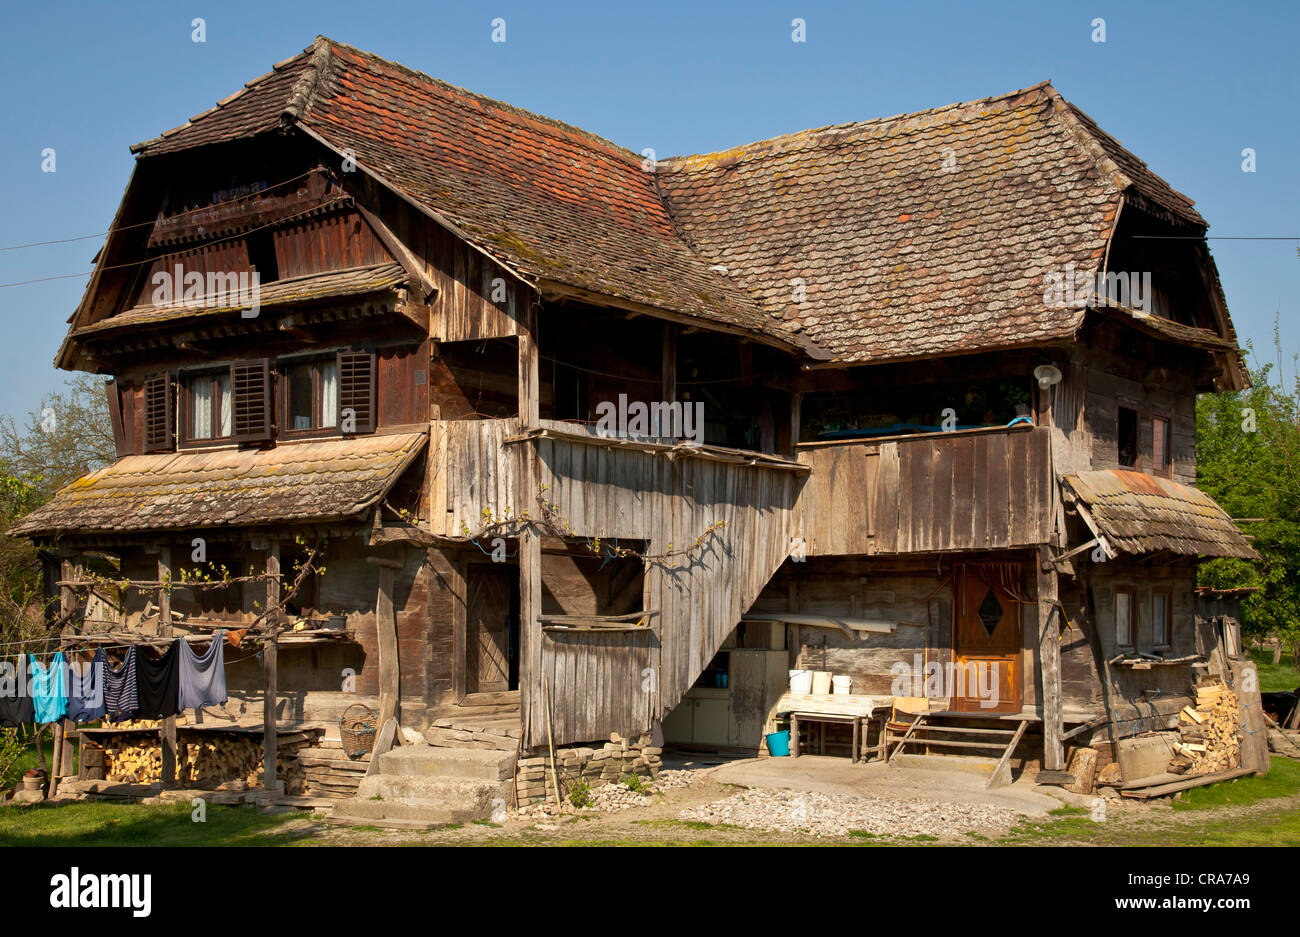 300-year-old wooden house in the Cigoc village, Park Pirode, Croatia, Europe Stock Photo